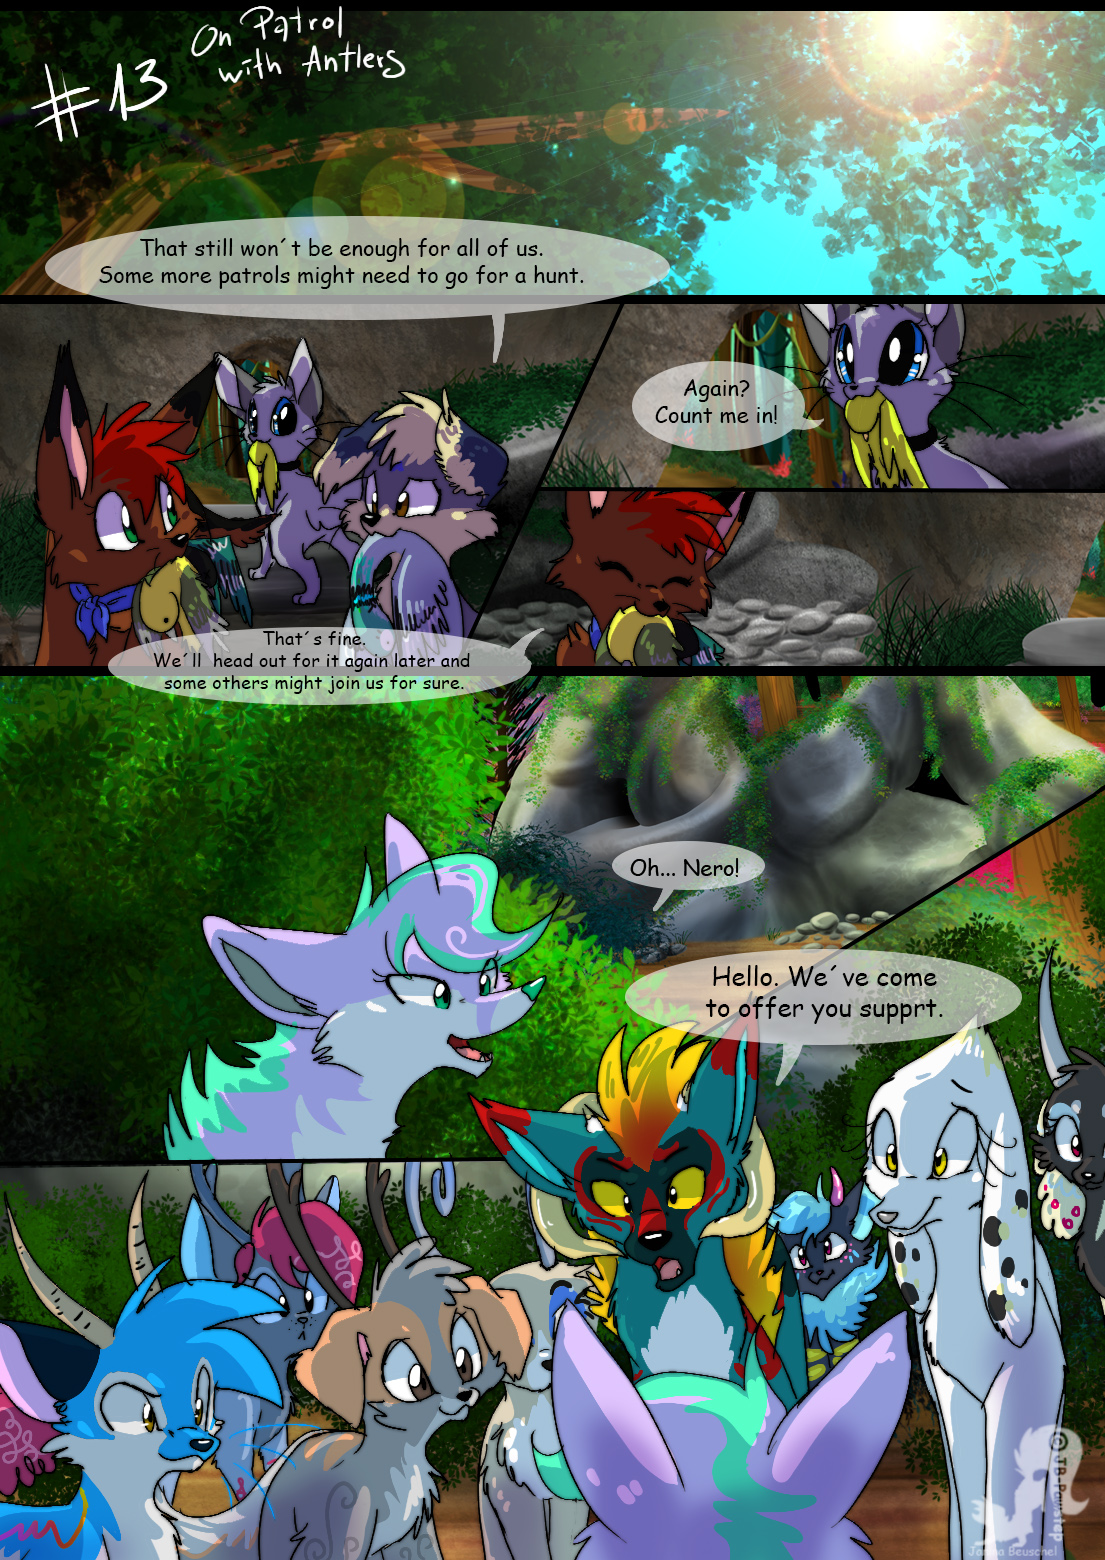 Chapter 13 - On Patrol with Antlers - Part 1